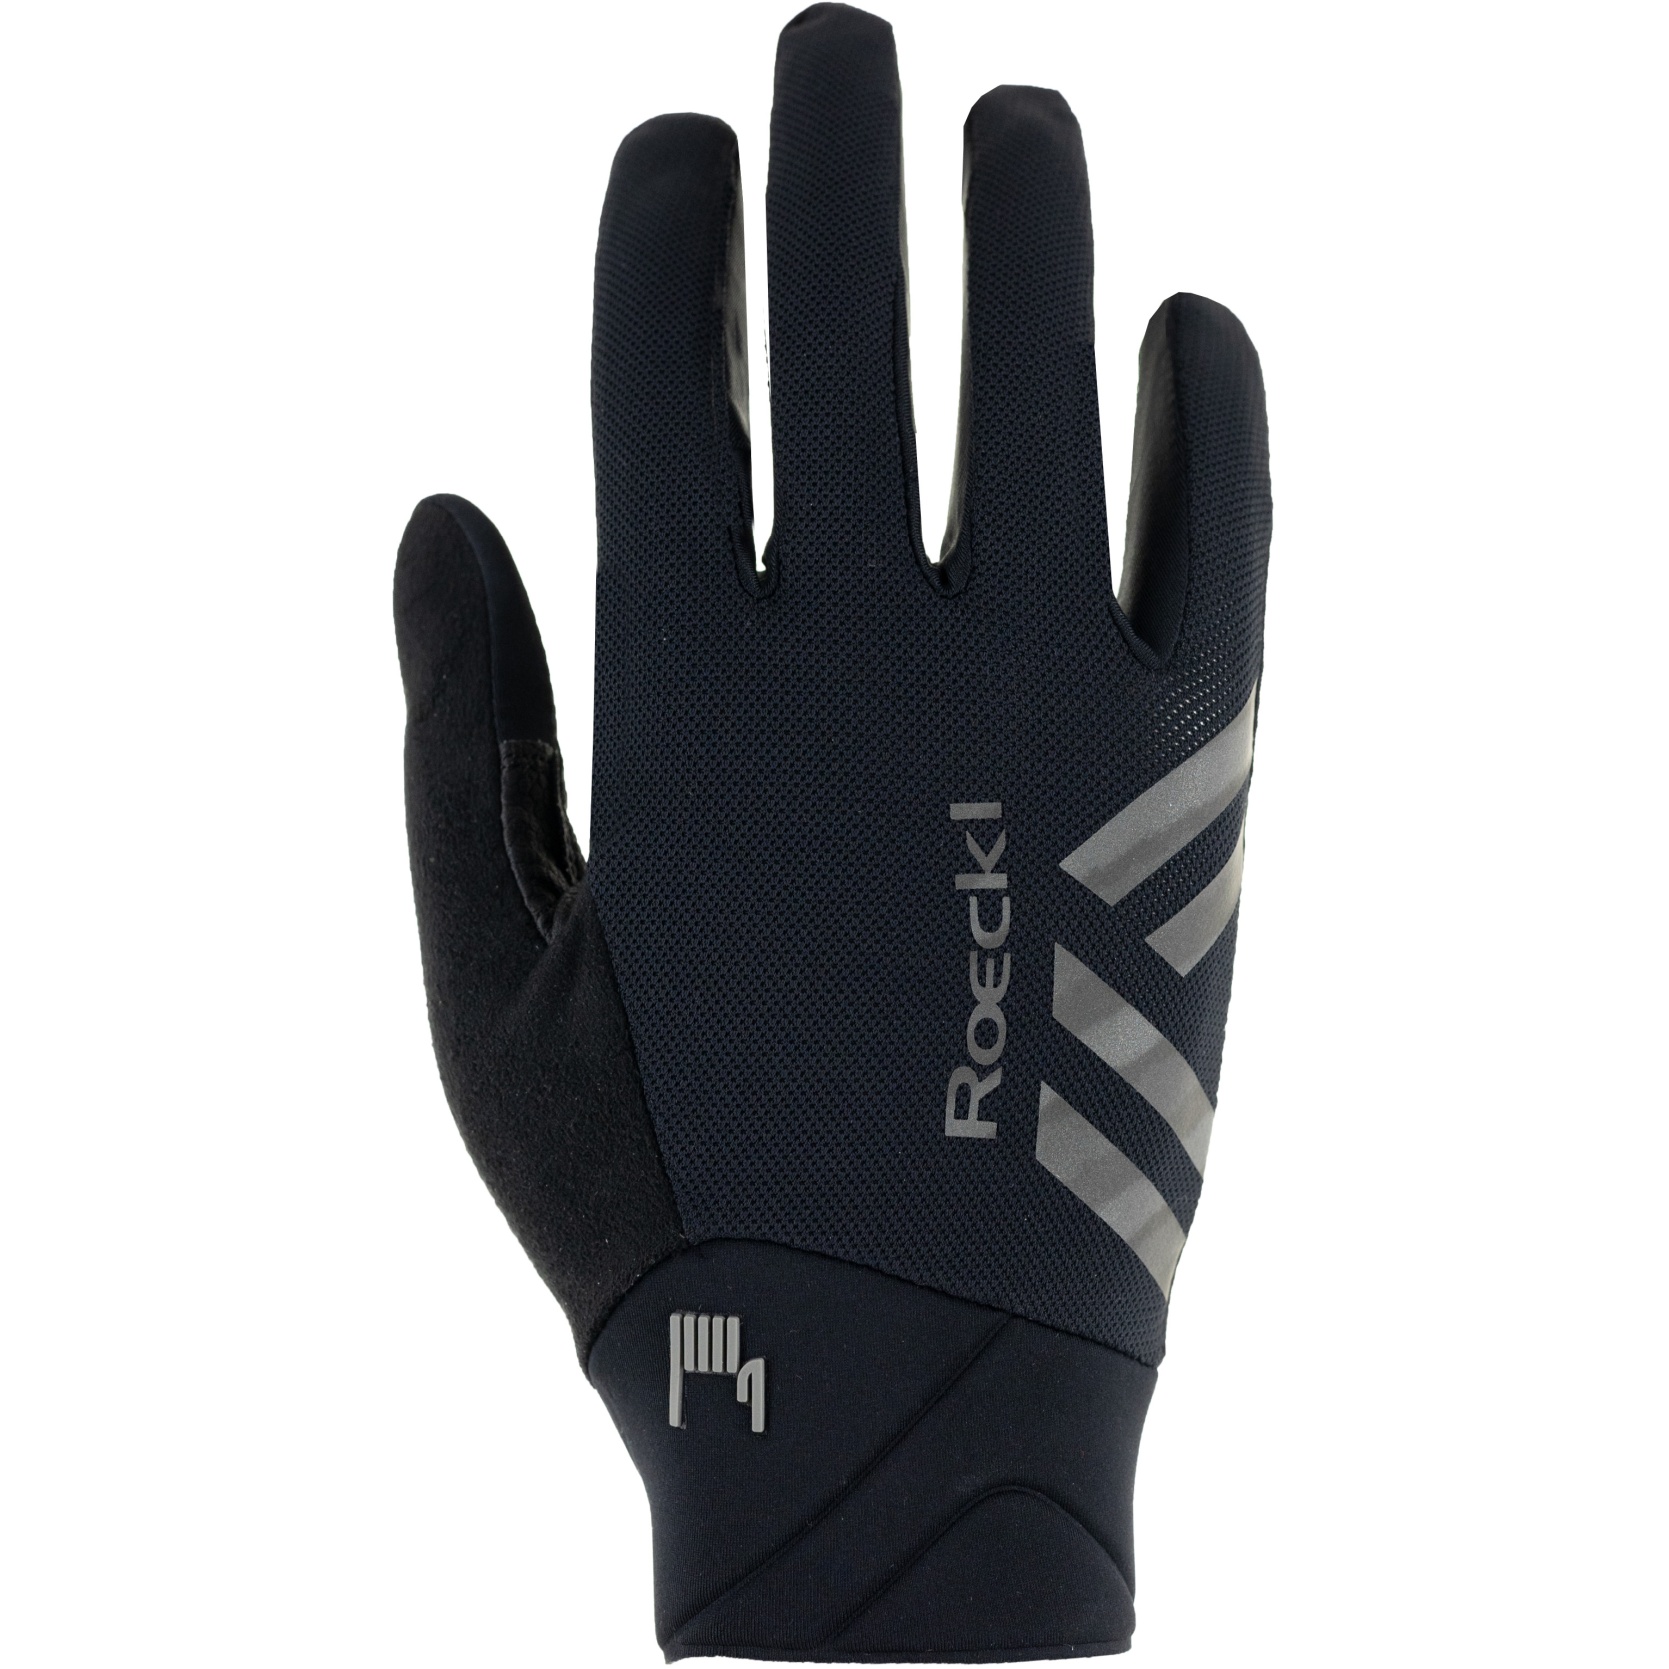 Picture of Roeckl Sports Morgex 2 Cycling Gloves - black 9000